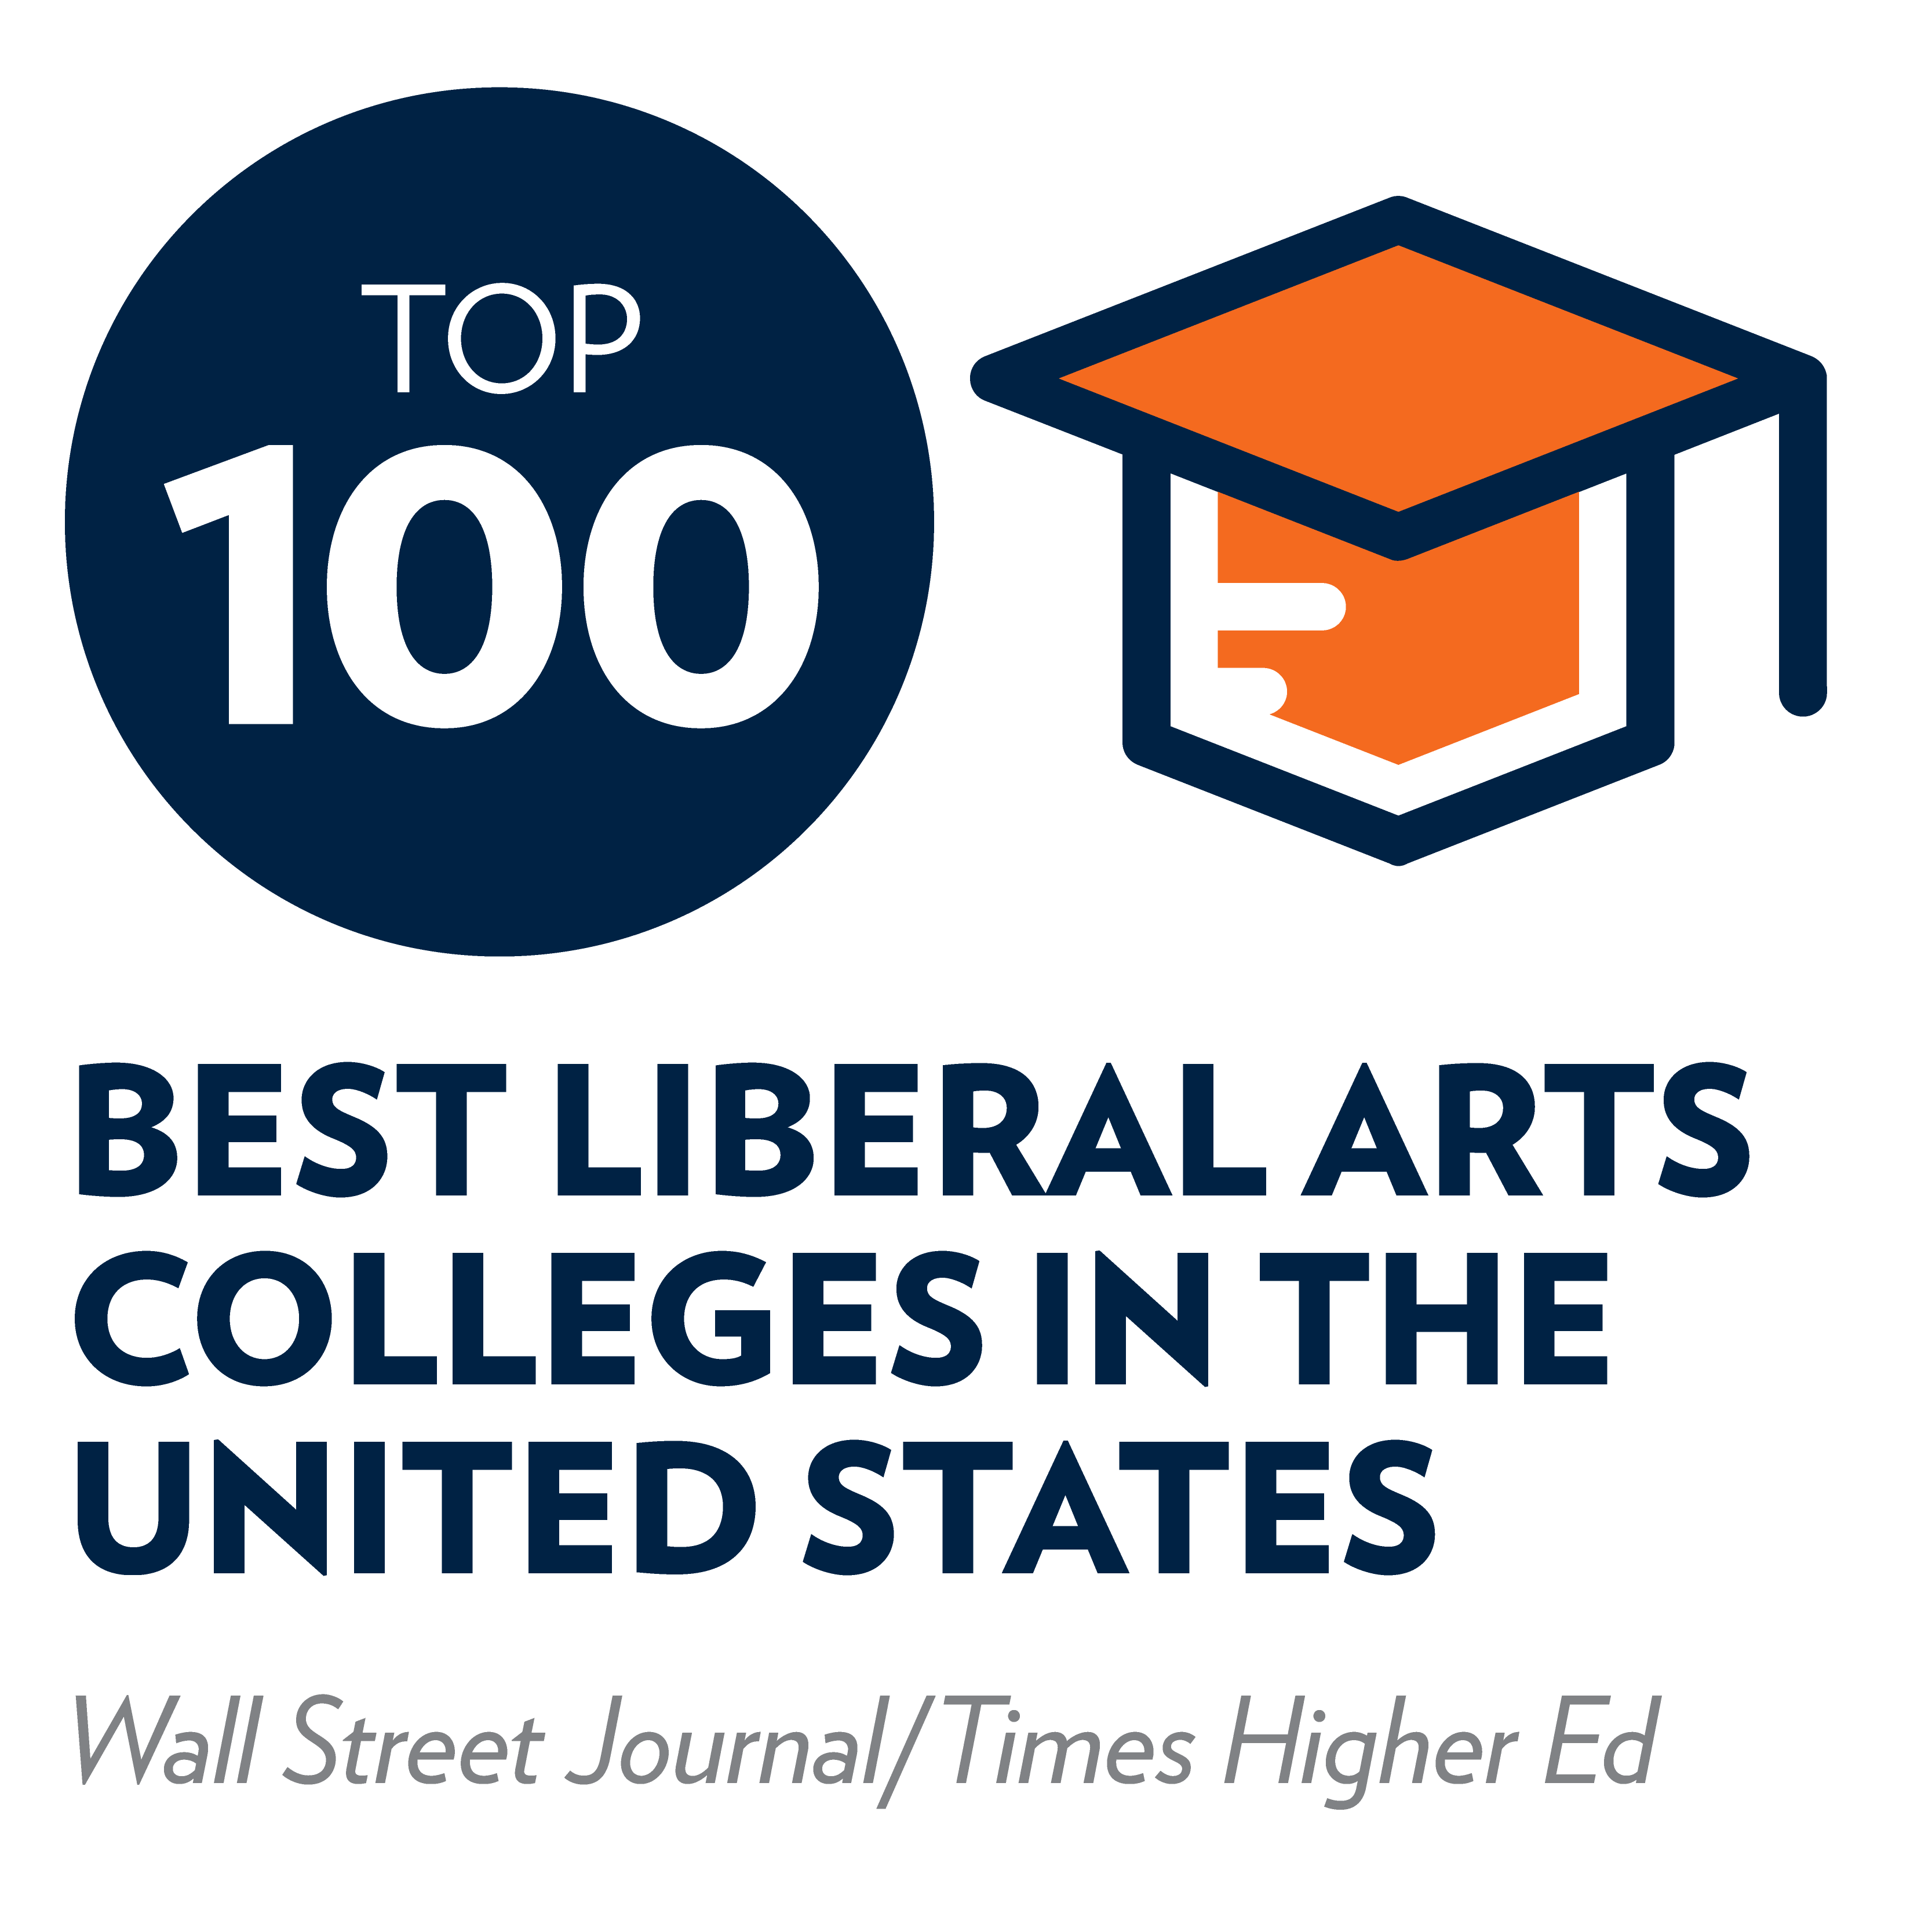 hope is listed in wall street journal's 100 best liberal arts colleges